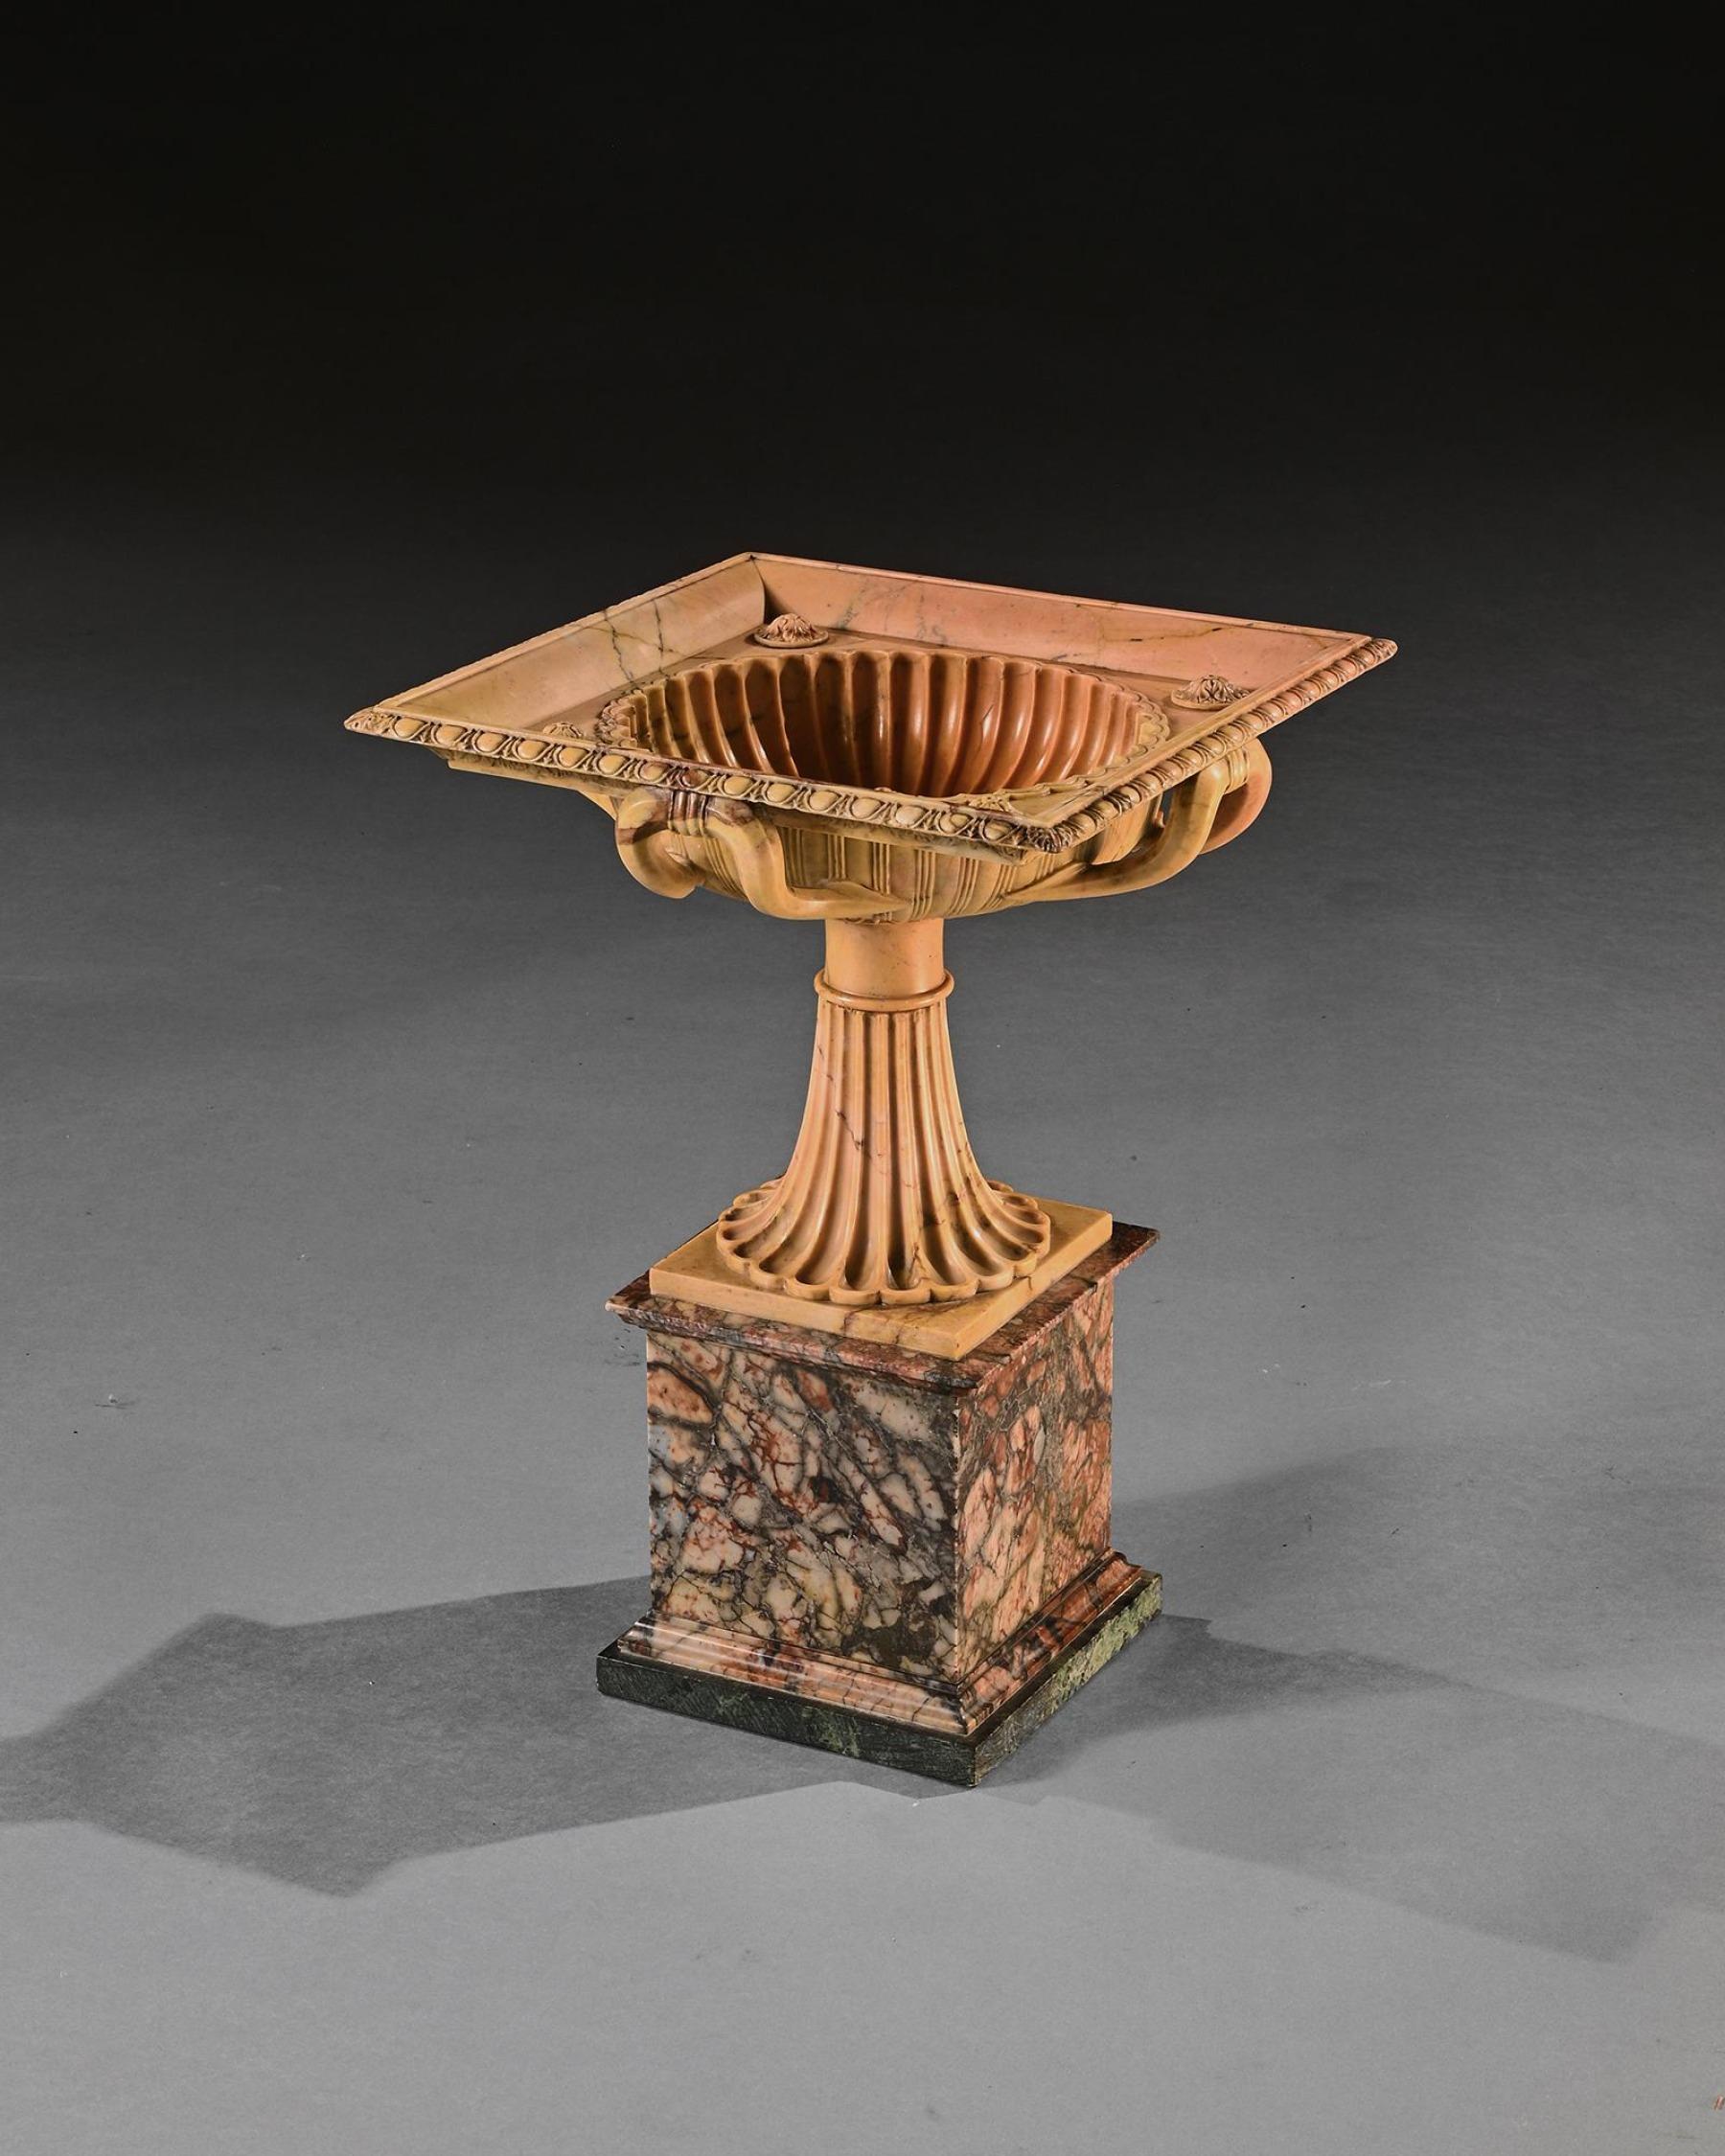 An Exquisite Giallo Antico Tazza of Unusual Square Section With Finely Carved In In Good Condition For Sale In Benington, Herts